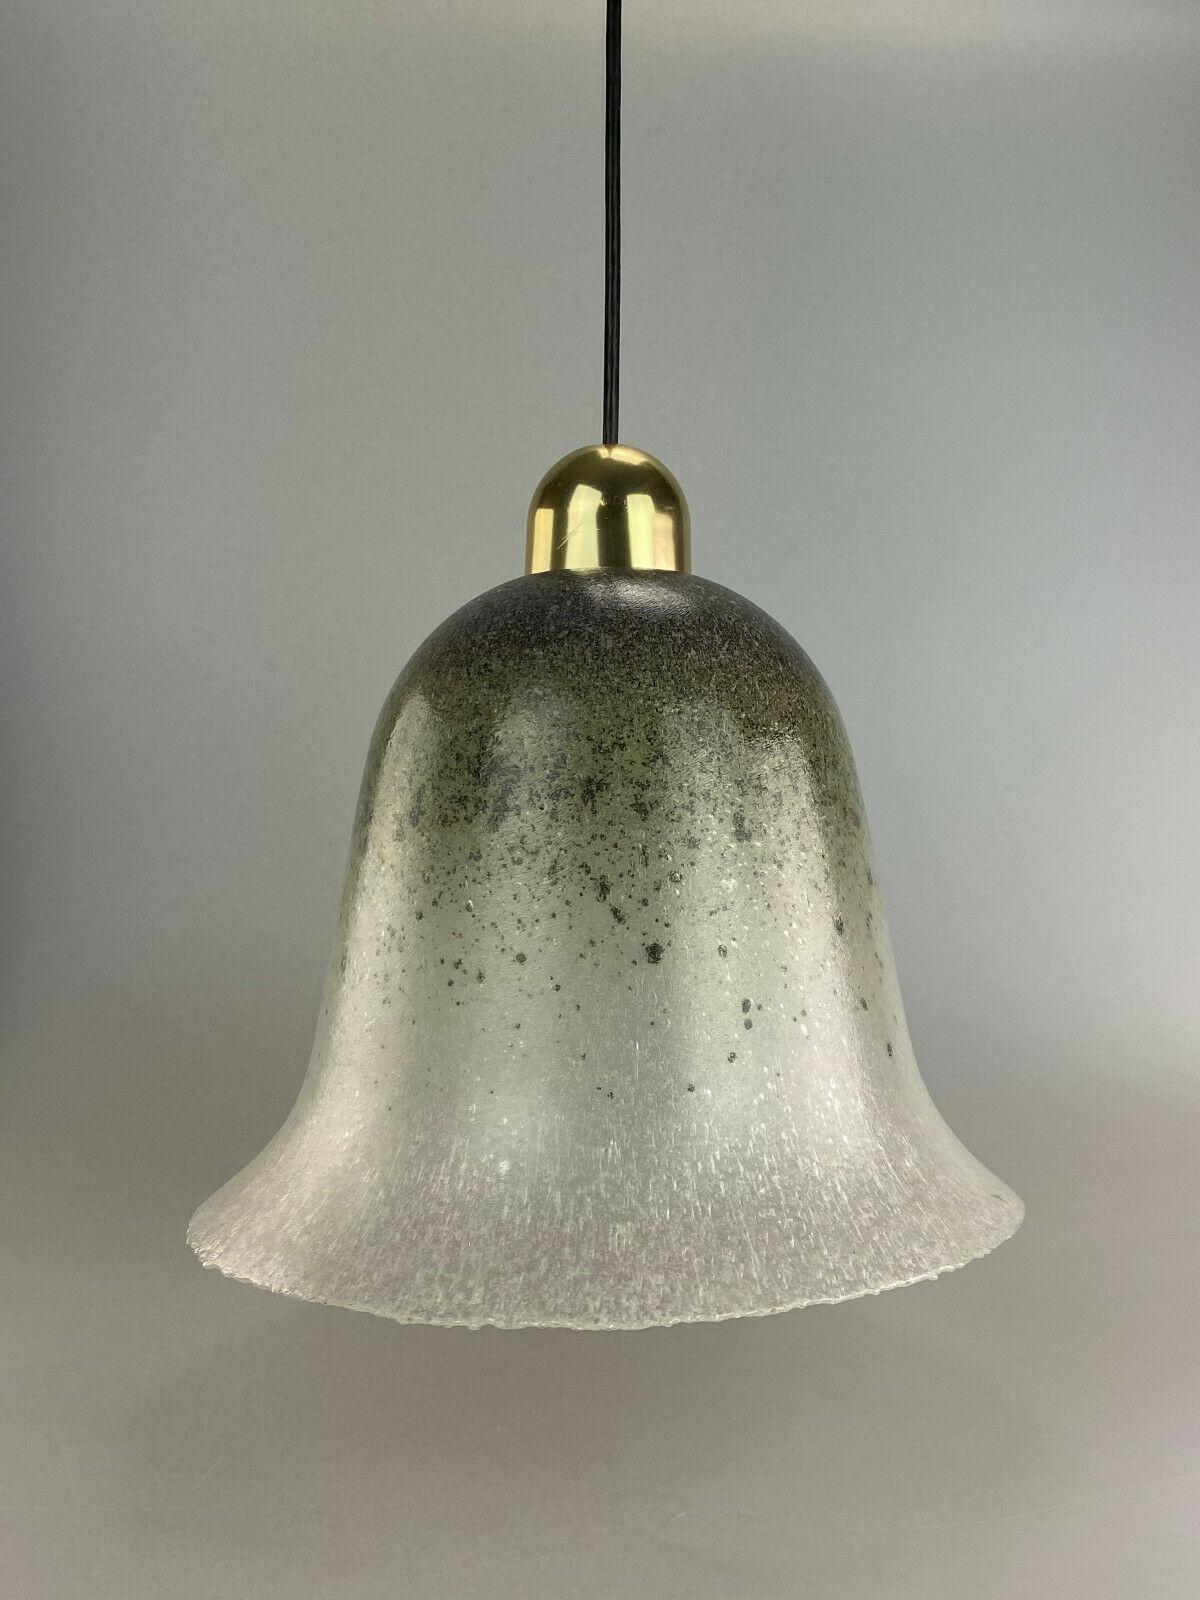 60s 70s Peill & Putzler hanging lamp ceiling lamp glass space design lamp

Object: lamp

Manufacturer: Peill & Putzler

Condition: good

Age: around 1960-1970

Dimensions:

Diameter = 34cm
Height = 32cm

Other notes:

The pictures